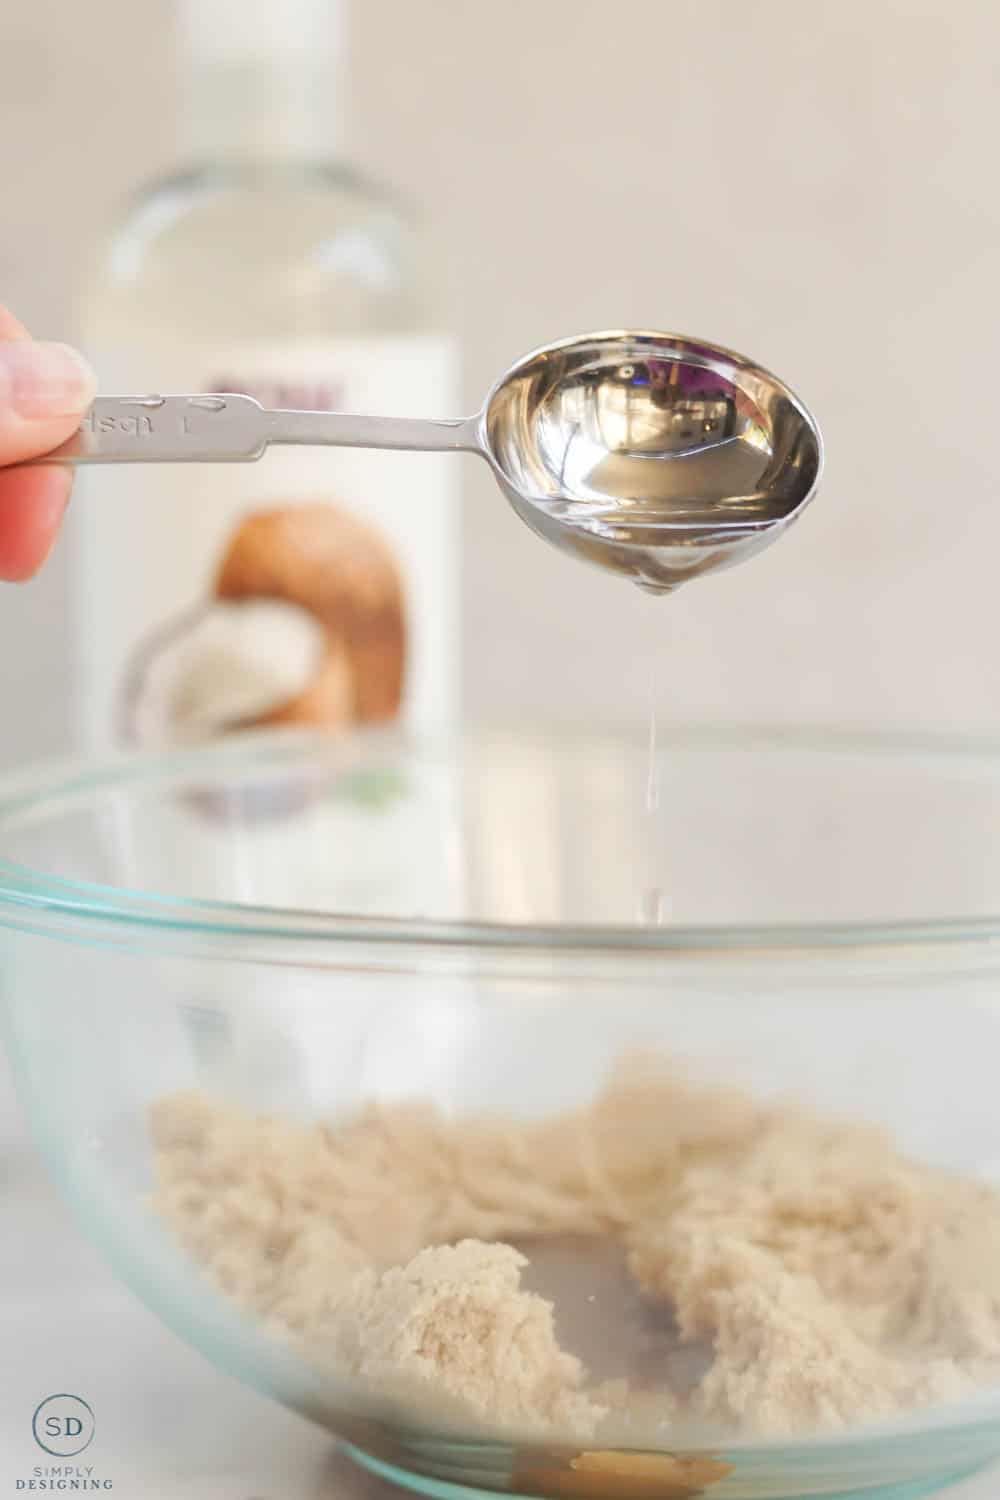 pour fractionated coconut oil into brown sugar